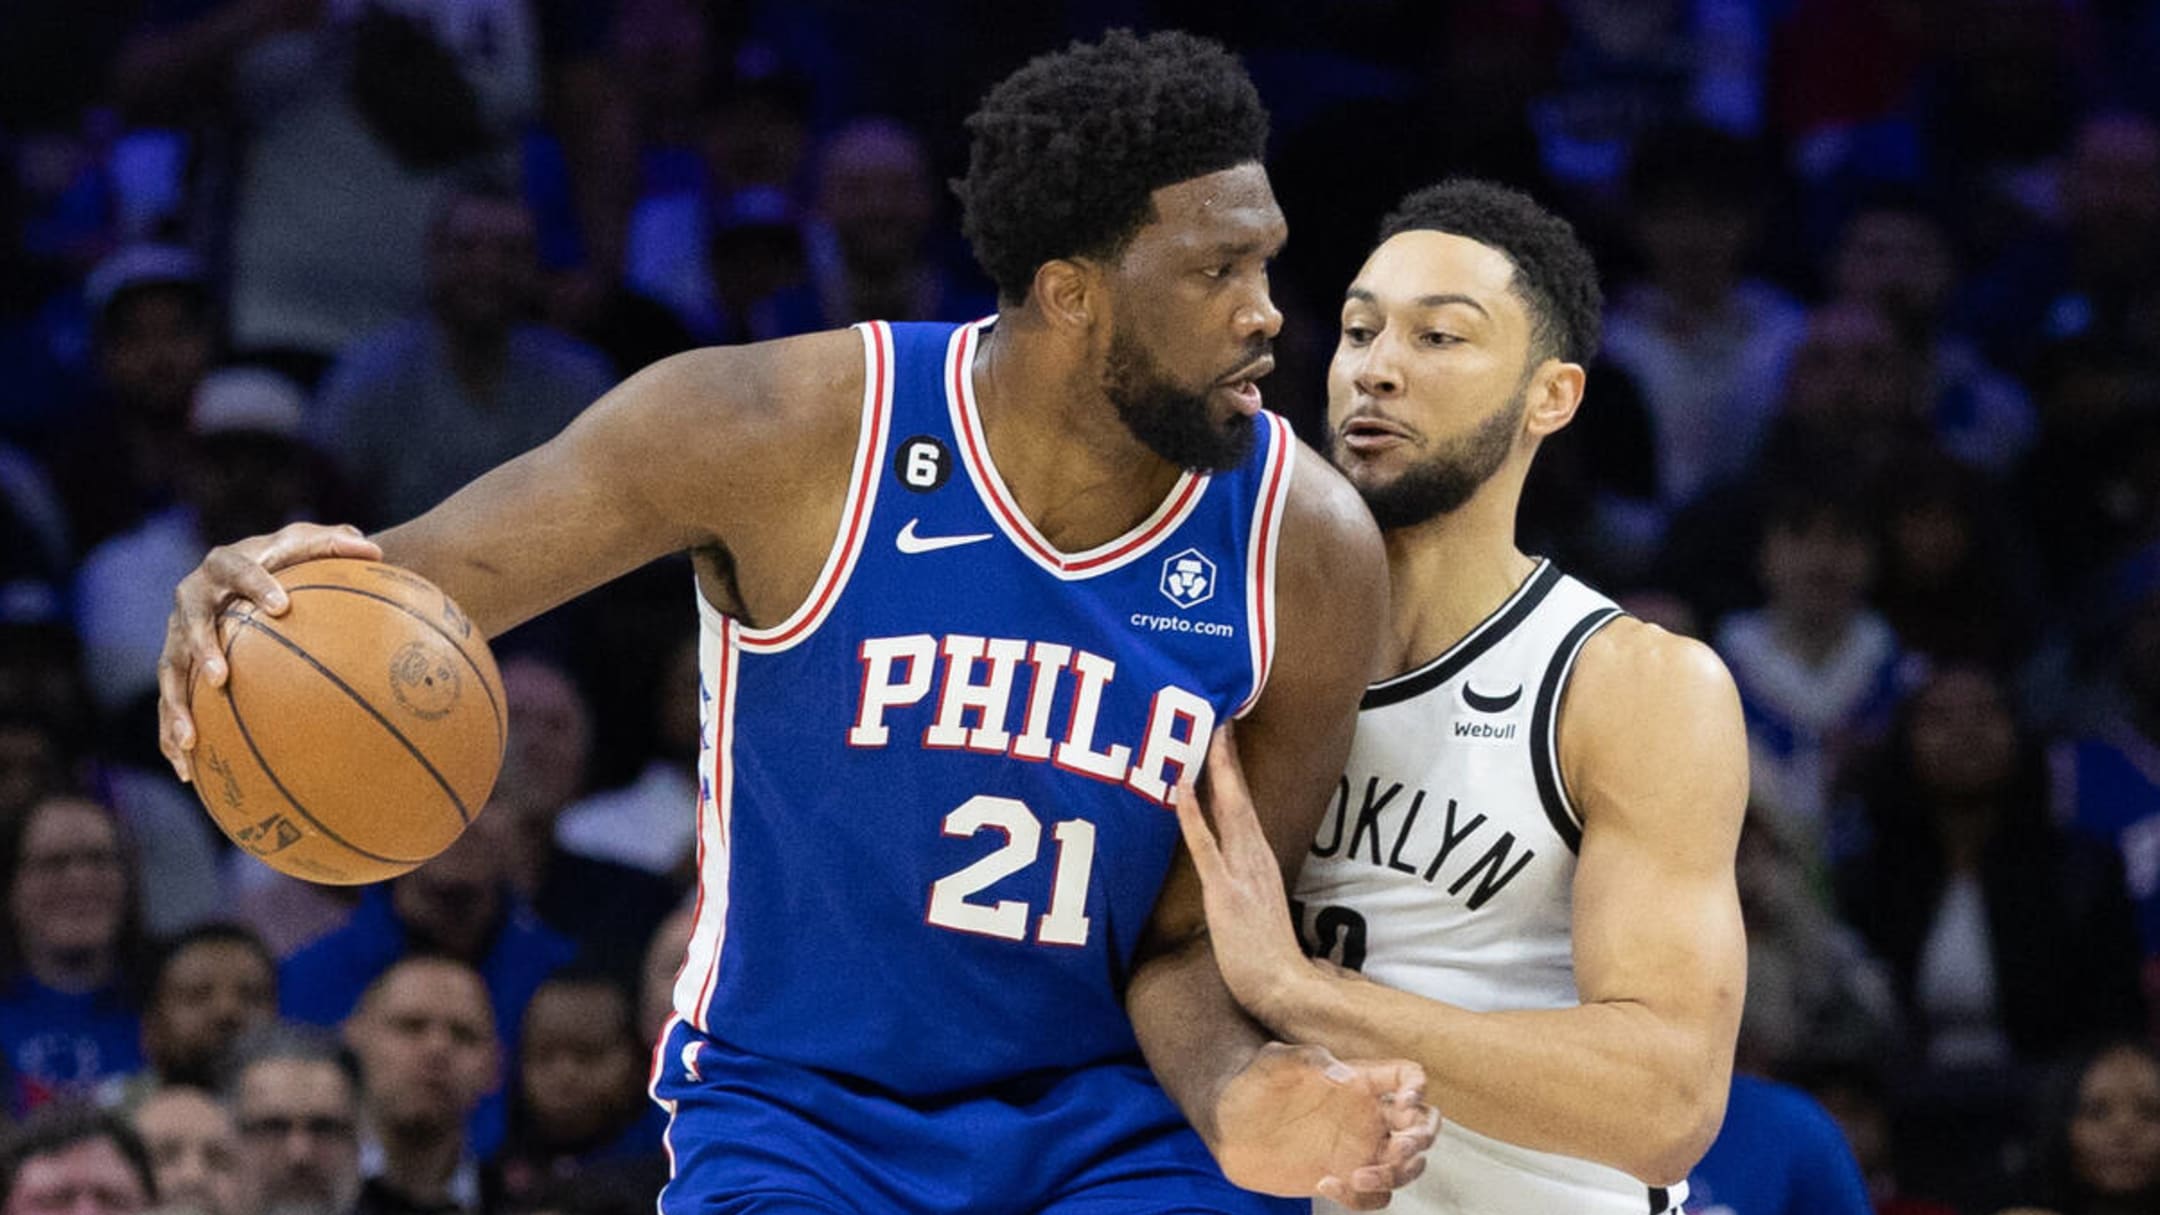 Ben Simmons booed in Philadelphia 76ers match with Brooklyn Nets